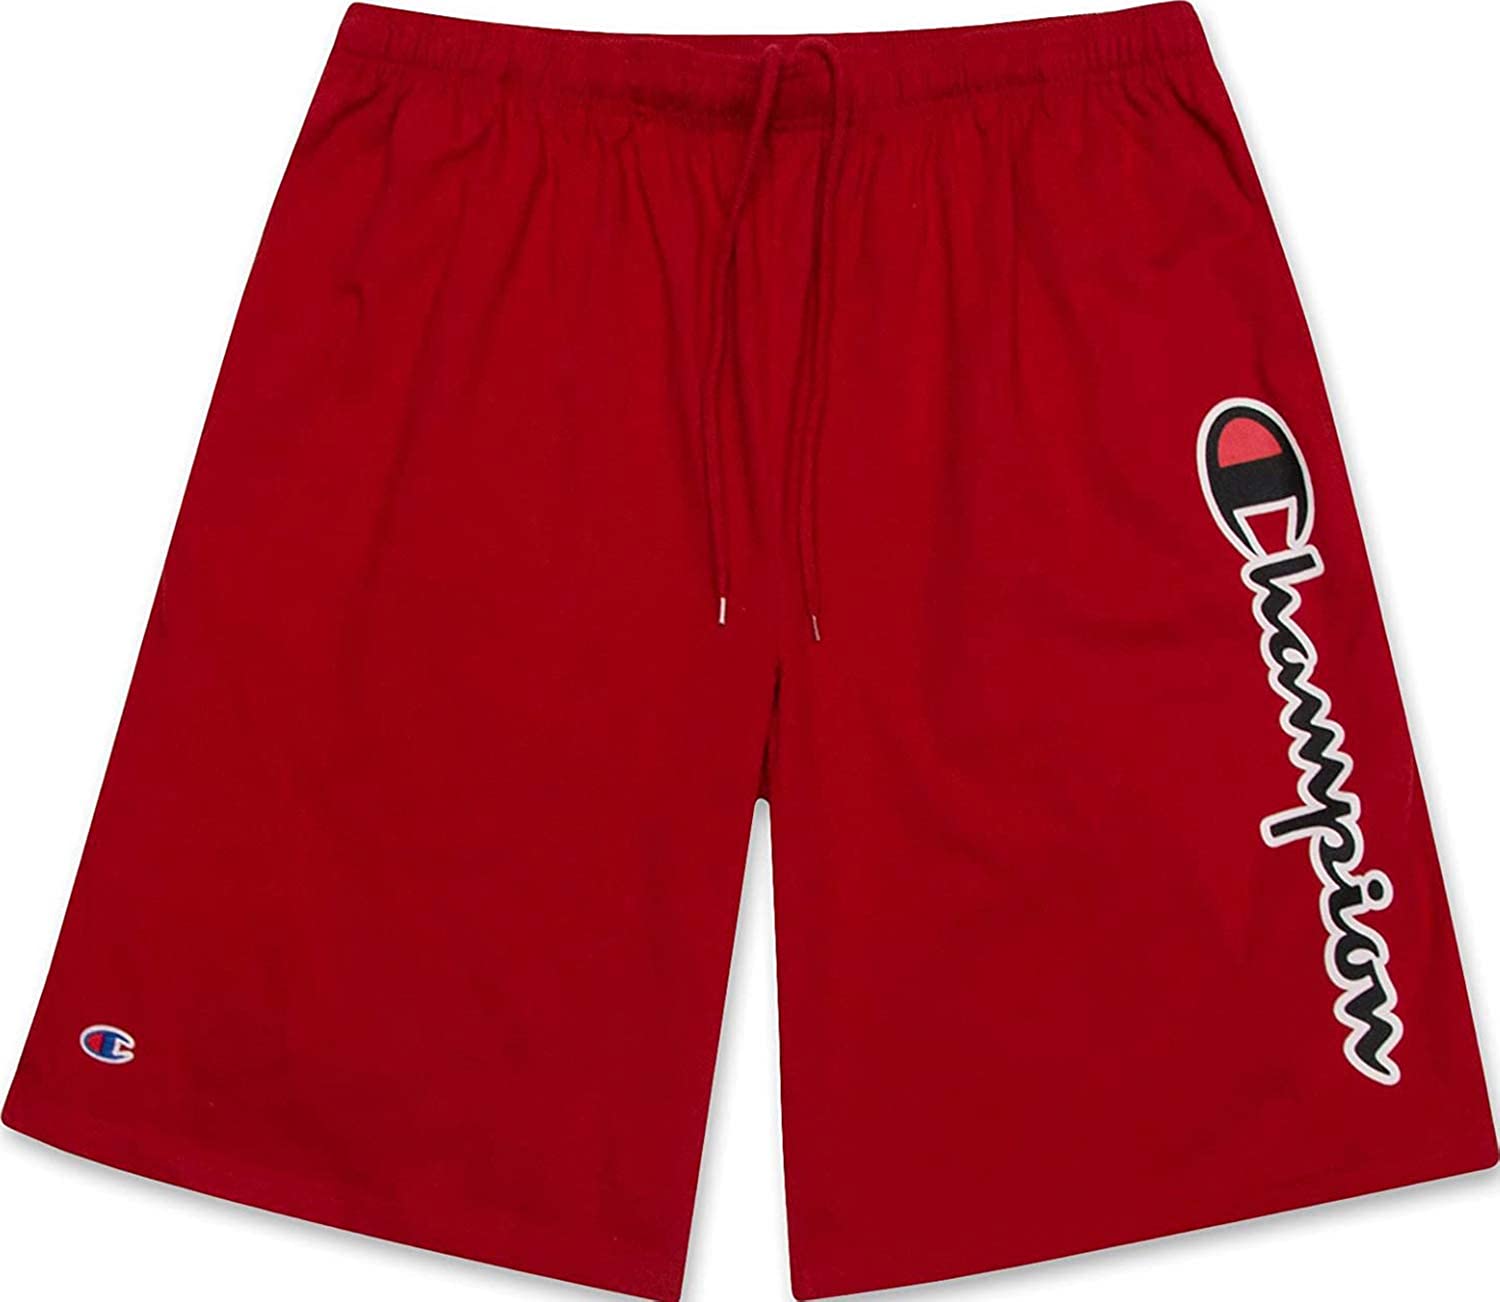 Champion Mens Big and Tall Lightweight Cotton Jersey Shorts with Script Logo 